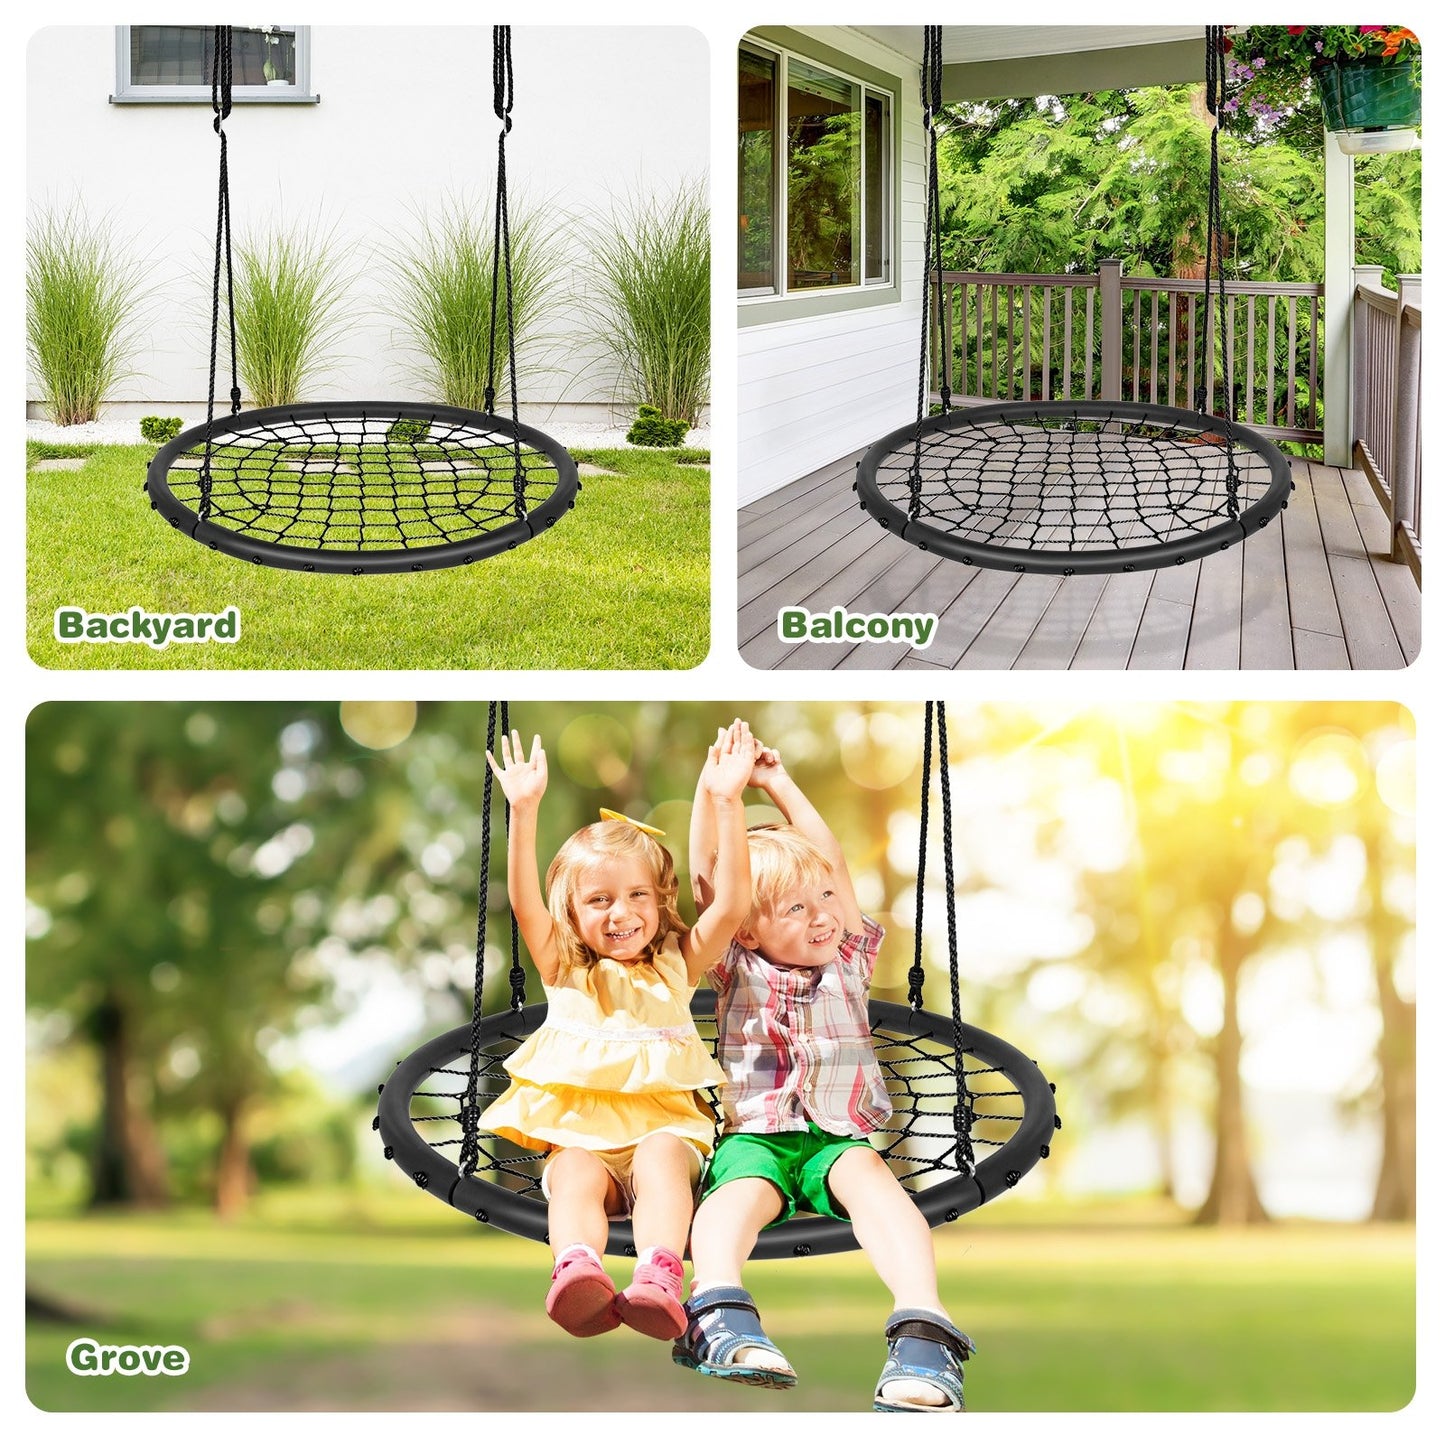 40 Inch Spider Web Tree Swing Set, Black at Gallery Canada